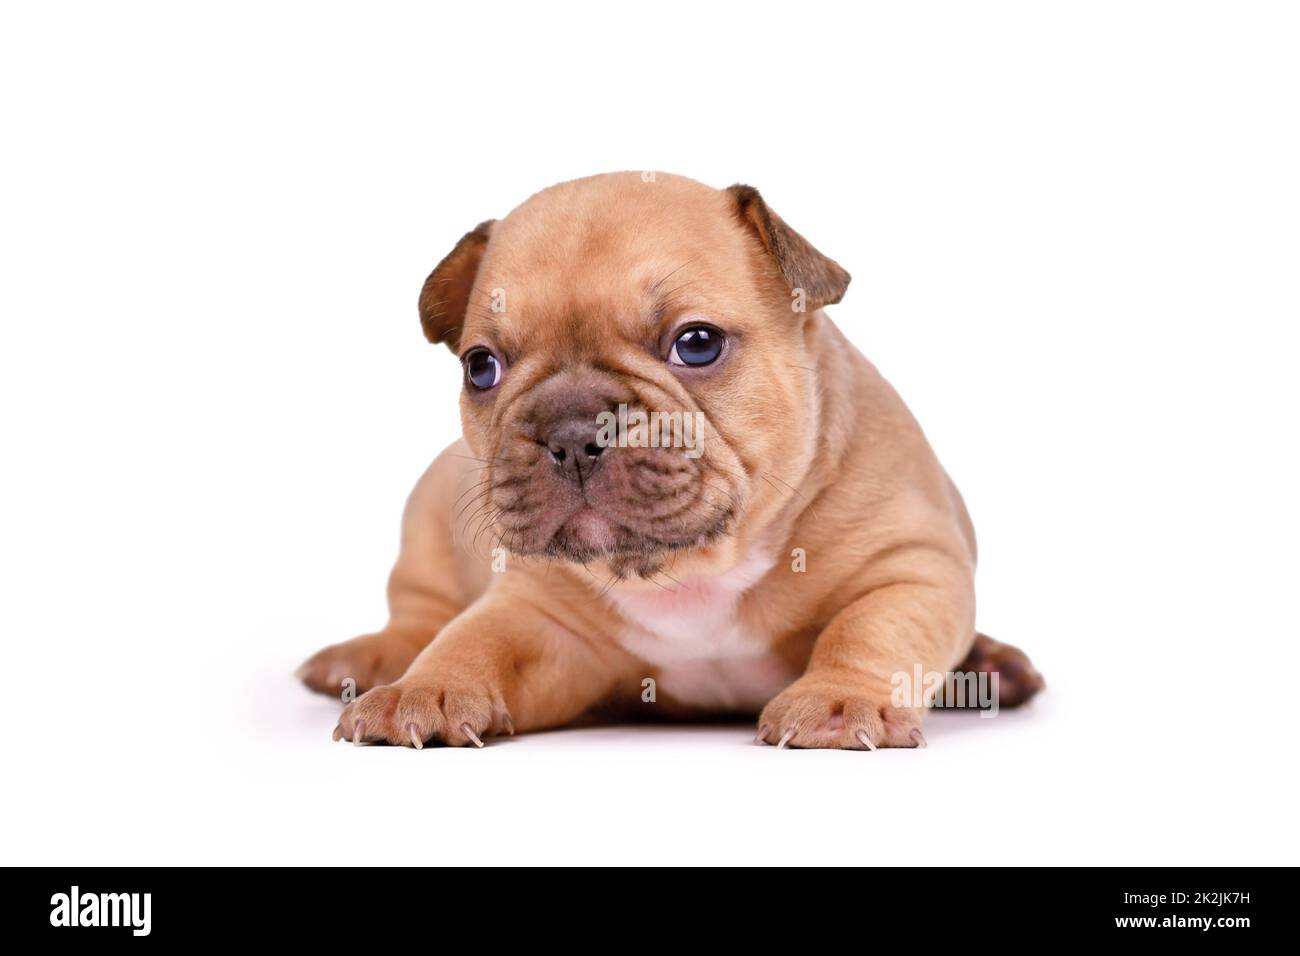 Red fawn colored French Bulldog dog puppy on white background Stock Photo